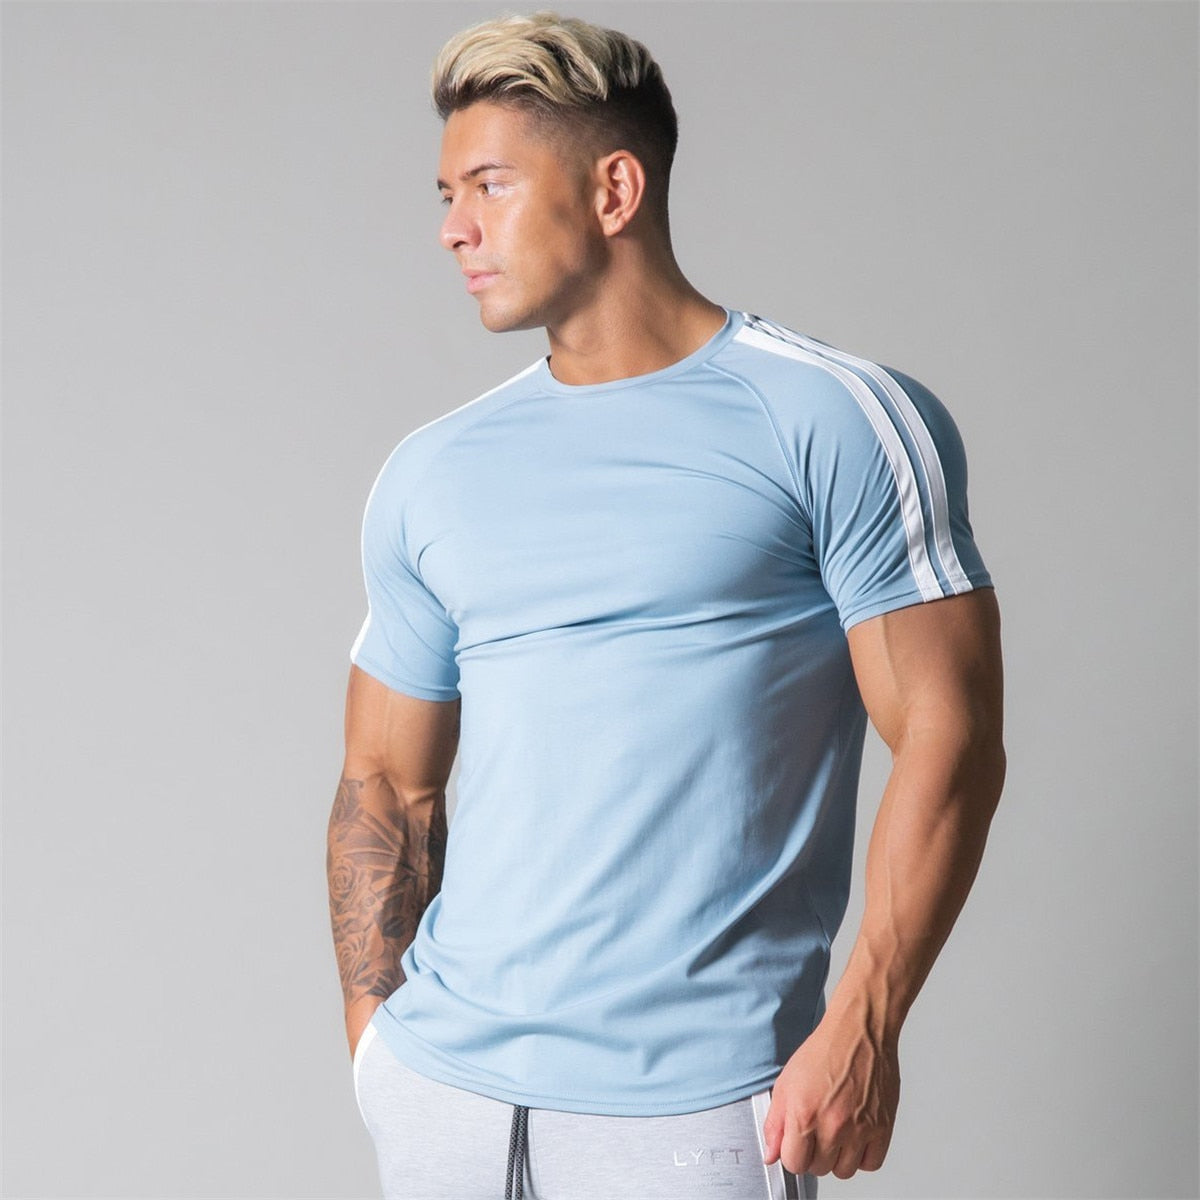 Gym Skinny T-shirt Men Cotton Casual Short Sleeve Shirt Male Bodybuilding Sport Tees Tops Summer Fitness Workout Clothing